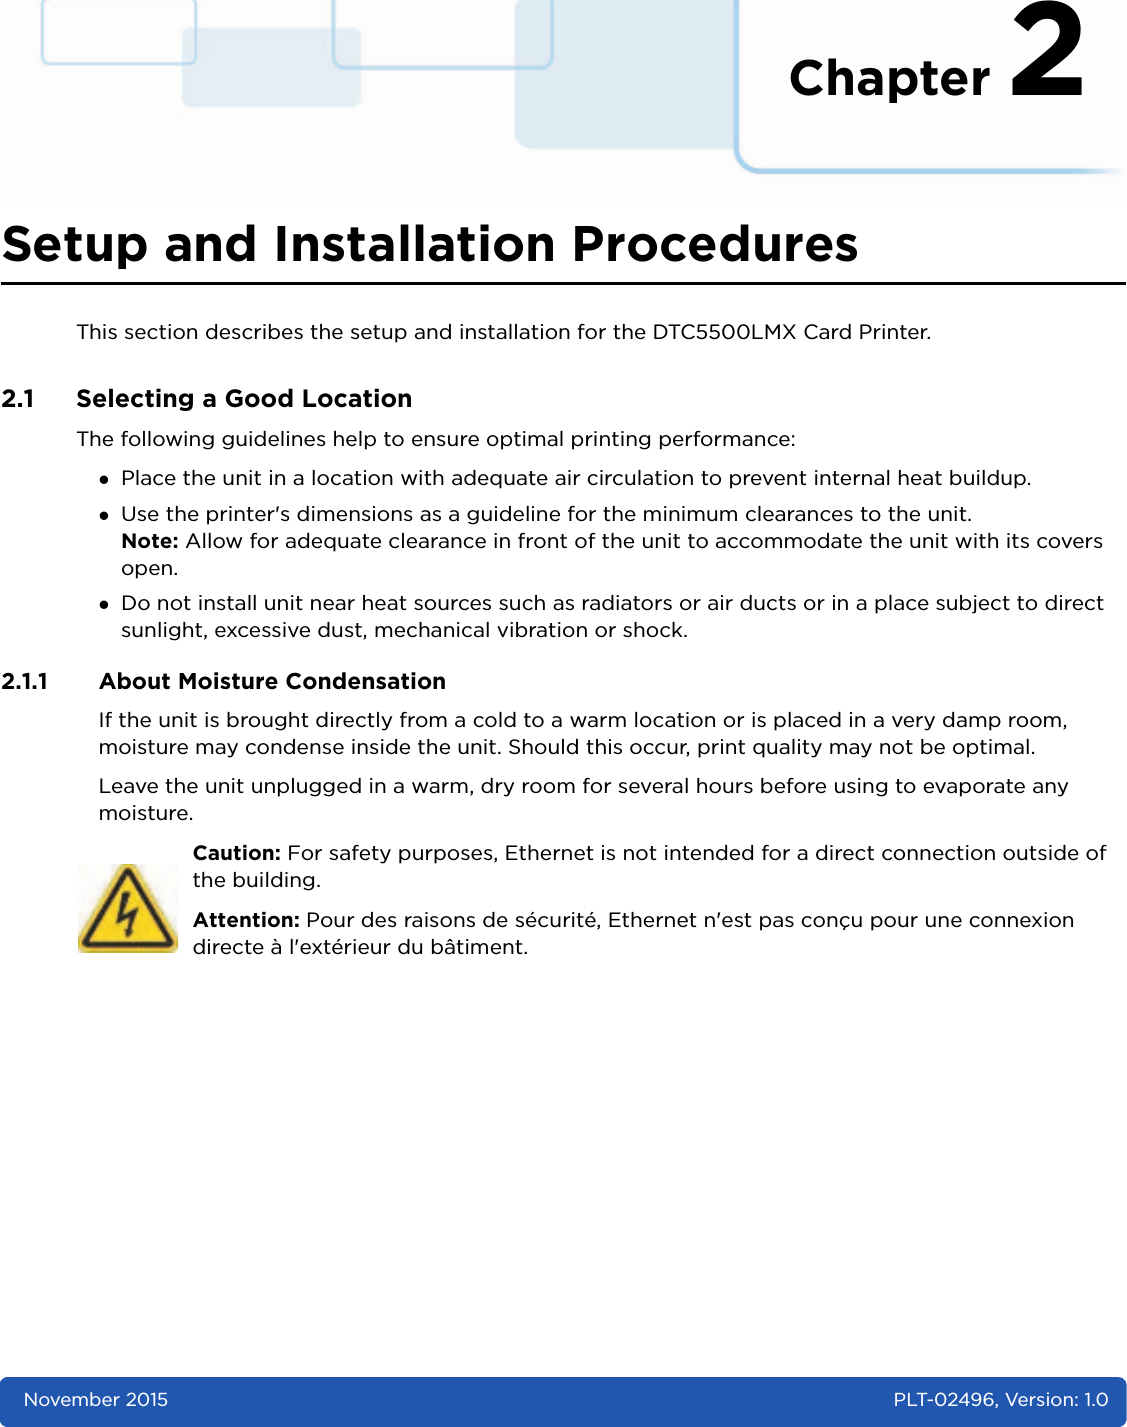 Chapter 2November 2015 PLT-02496, Version: 1.0Setup and Installation ProceduresThis section describes the setup and installation for the DTC5500LMX Card Printer. 2.1 Selecting a Good LocationThe following guidelines help to ensure optimal printing performance:Place the unit in a location with adequate air circulation to prevent internal heat buildup.Use the printer&apos;s dimensions as a guideline for the minimum clearances to the unit.Note: Allow for adequate clearance in front of the unit to accommodate the unit with its covers open.Do not install unit near heat sources such as radiators or air ducts or in a place subject to direct sunlight, excessive dust, mechanical vibration or shock. 2.1.1 About Moisture CondensationIf the unit is brought directly from a cold to a warm location or is placed in a very damp room, moisture may condense inside the unit. Should this occur, print quality may not be optimal. Leave the unit unplugged in a warm, dry room for several hours before using to evaporate any moisture. Caution: For safety purposes, Ethernet is not intended for a direct connection outside of the building.Attention: Pour des raisons de sécurité, Ethernet n&apos;est pas conçu pour une connexion directe à l&apos;extérieur du bâtiment.